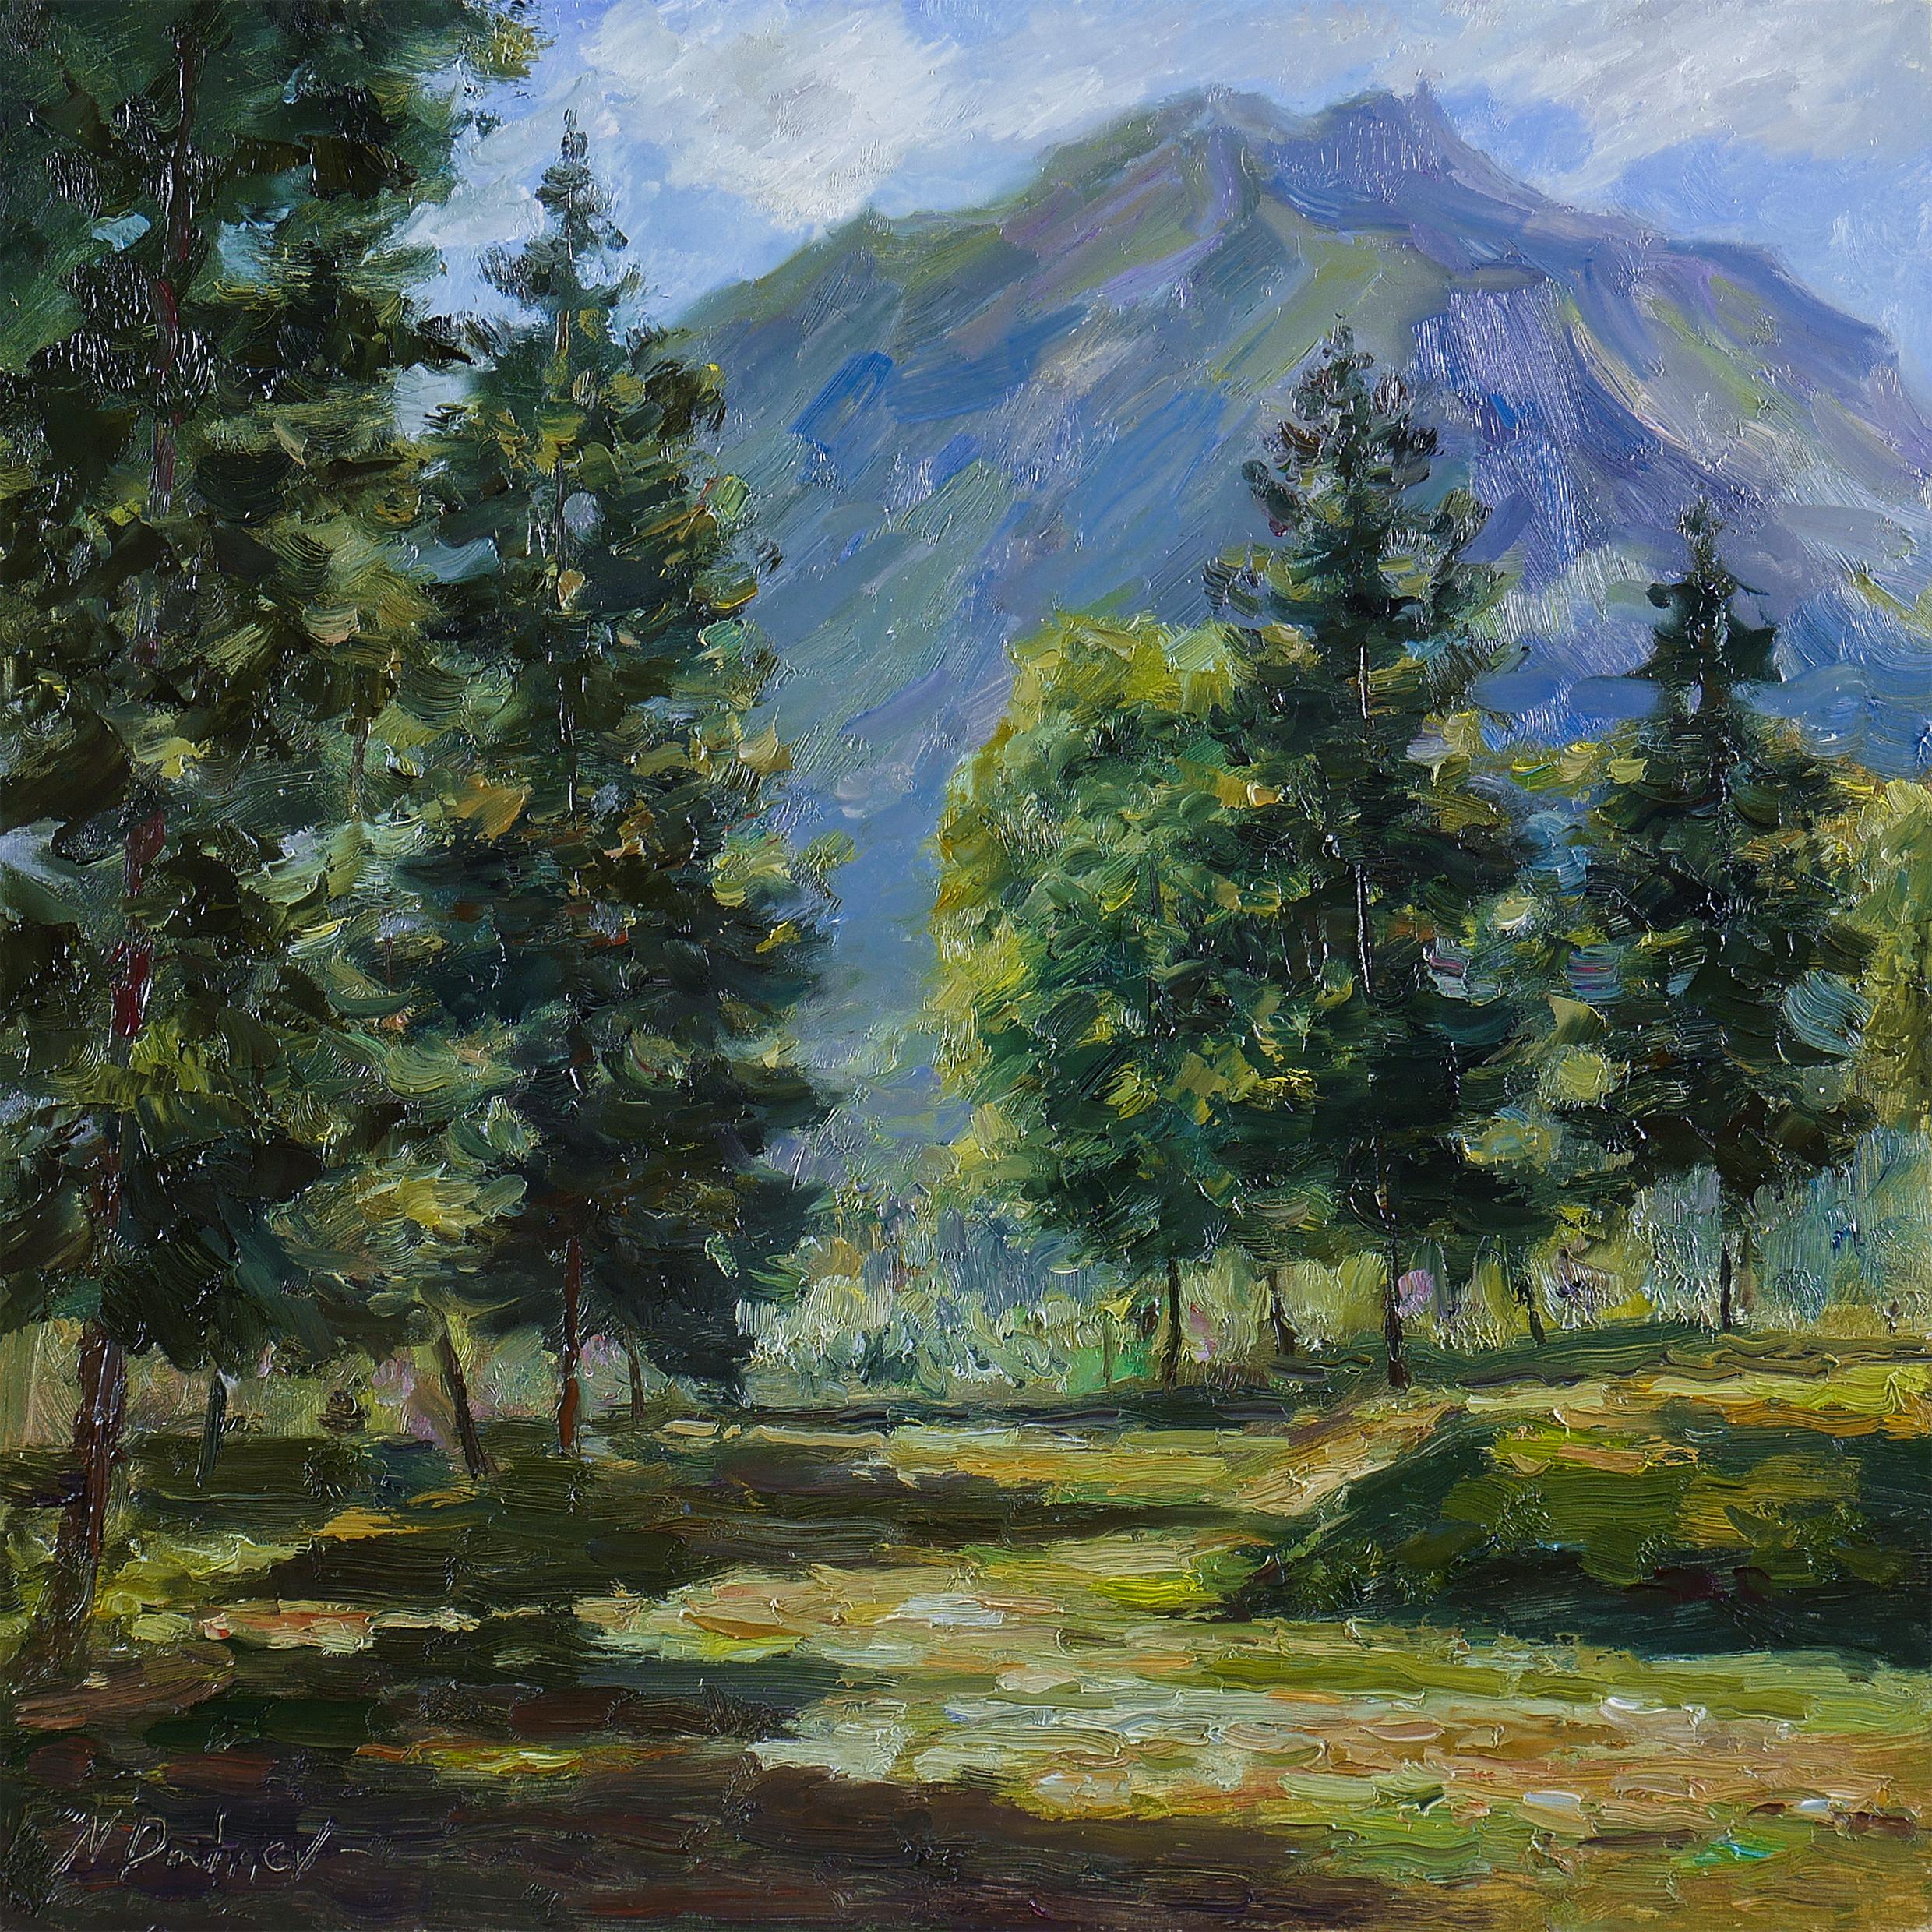 Morning in the mountains - mountain landscape painting